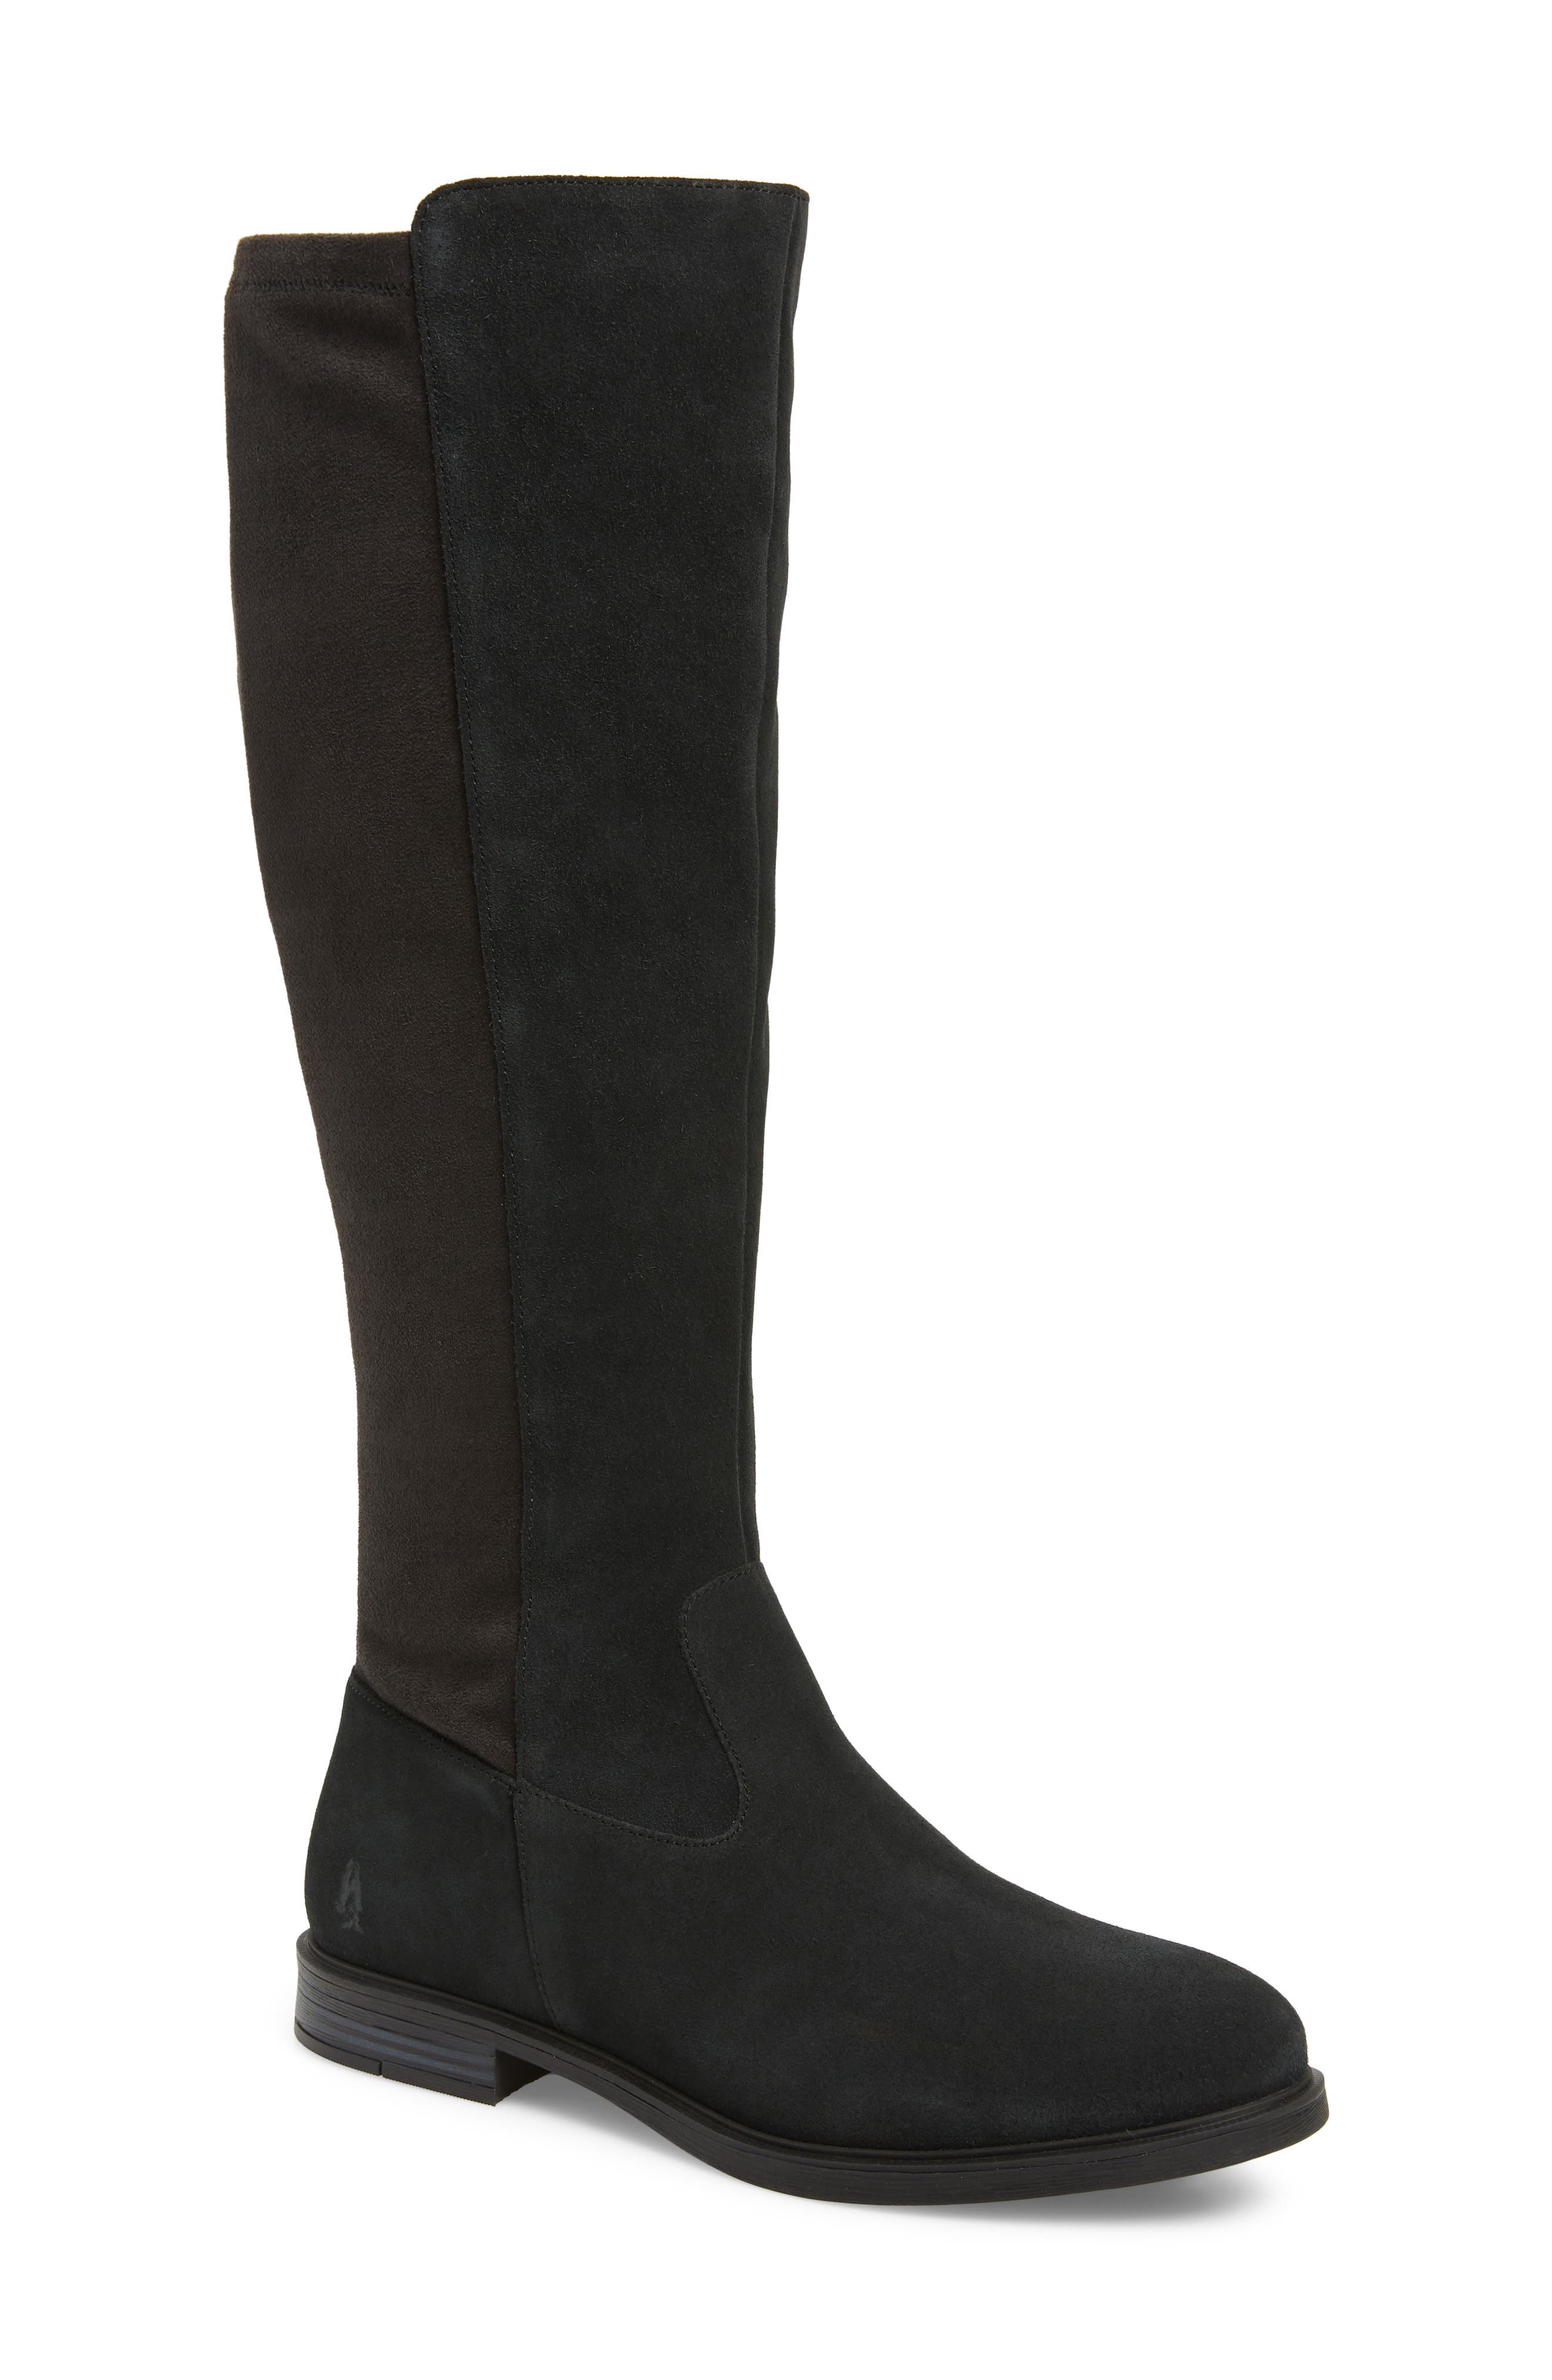 hush puppies knee high boots